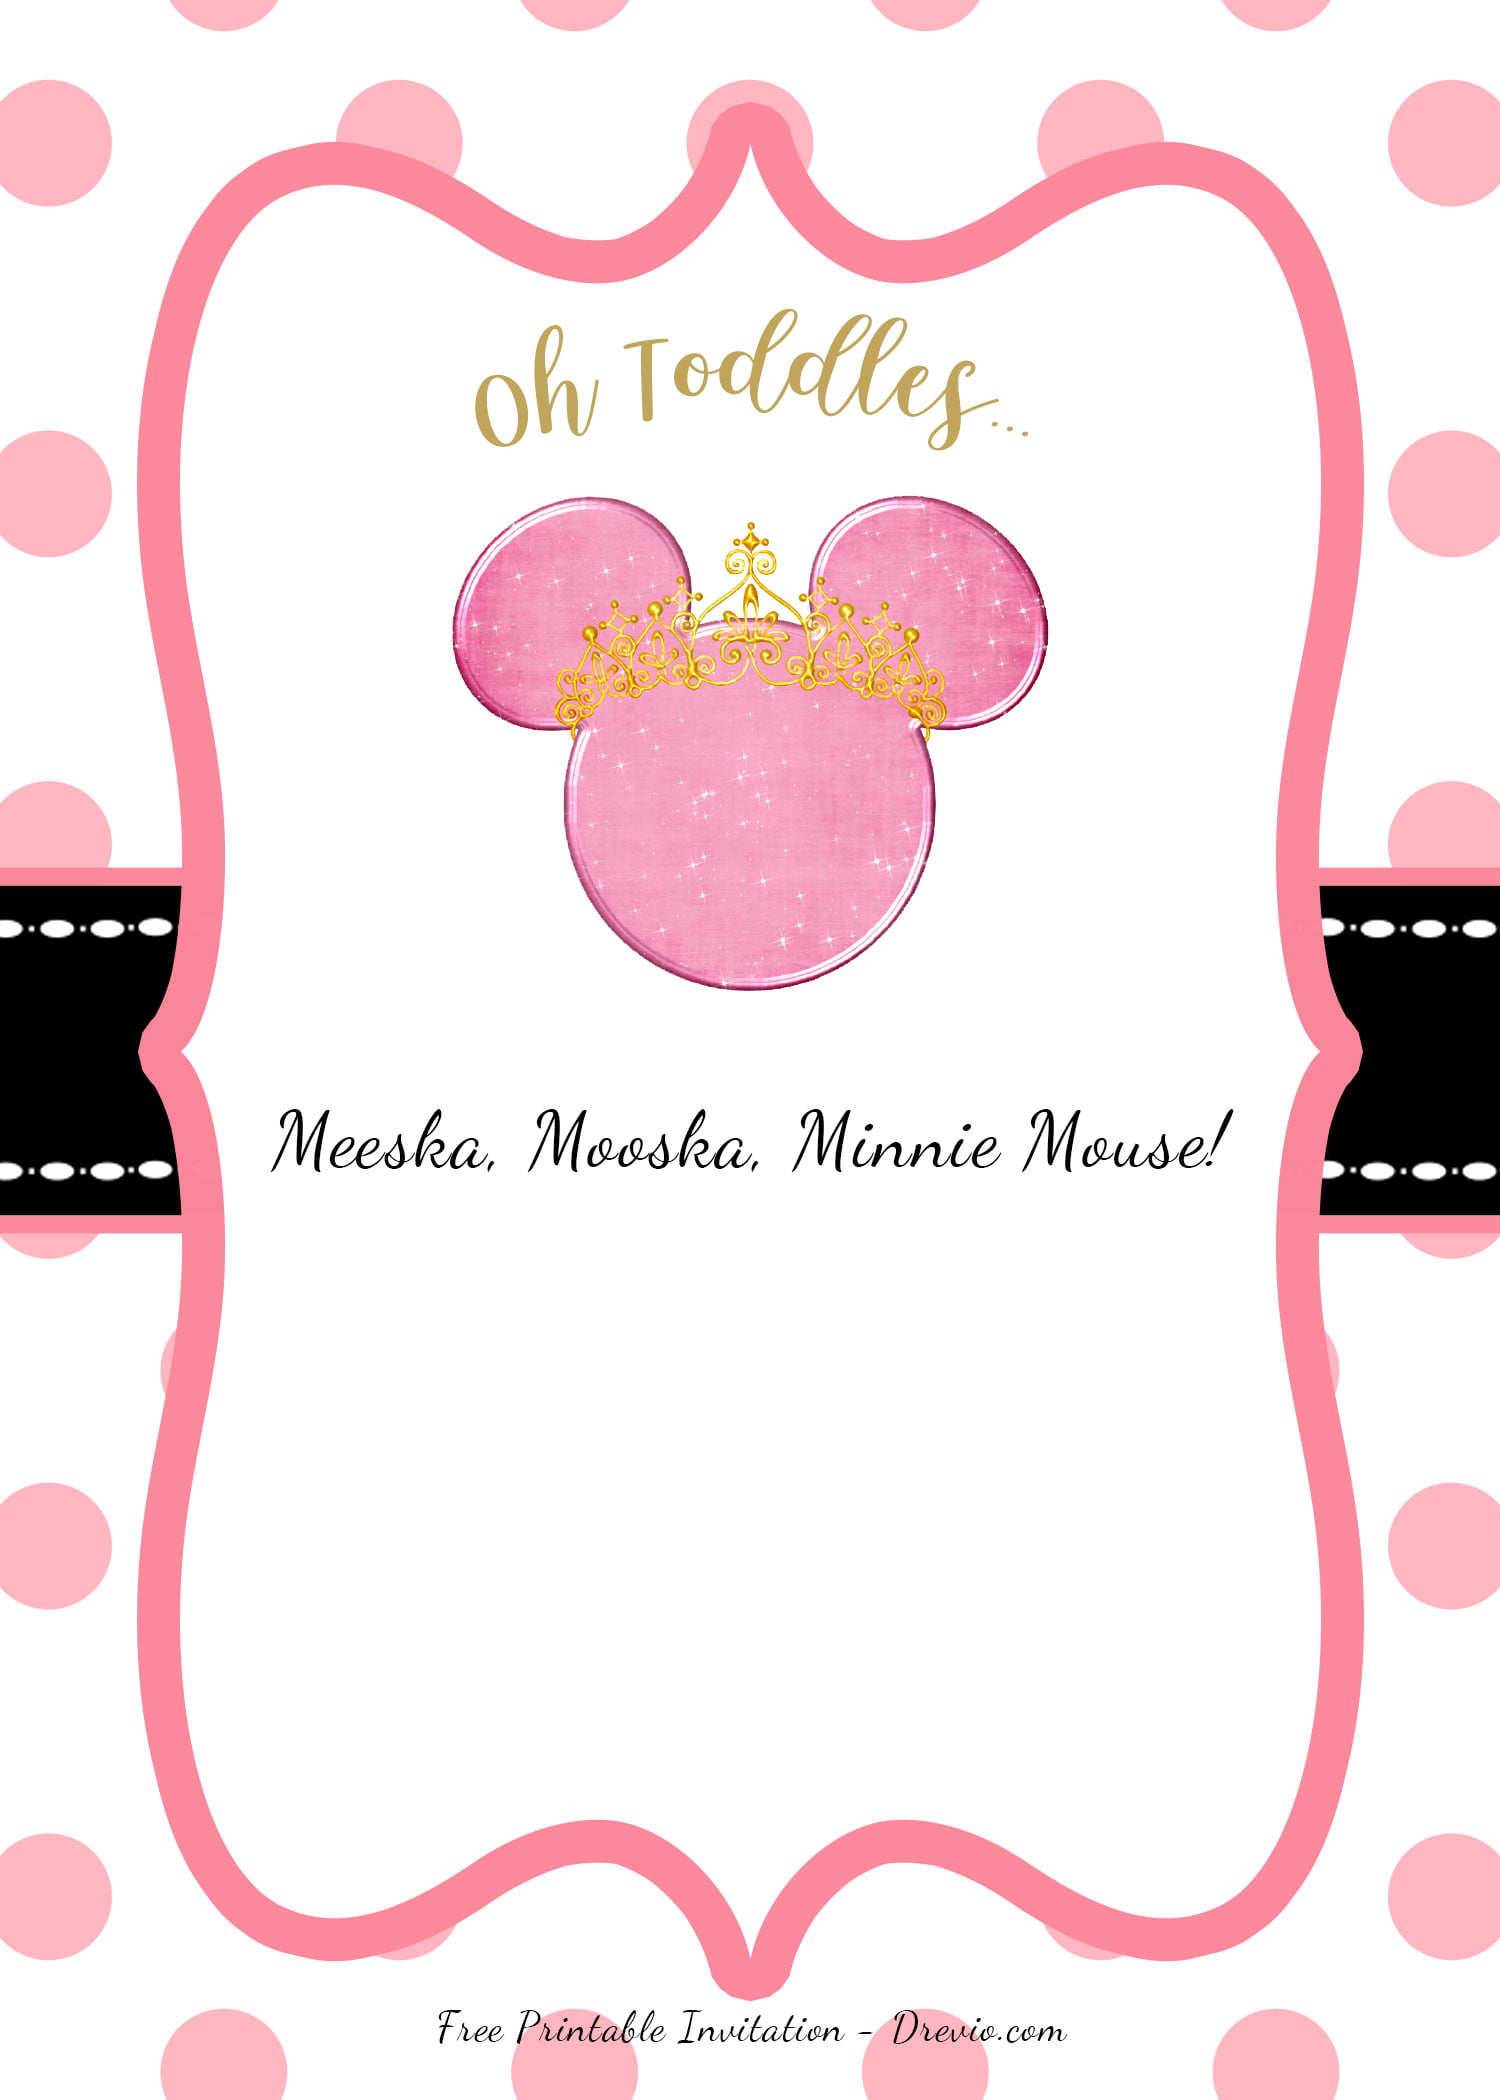 Minnie Mouse Invitation Template Free from www.bagvania.com